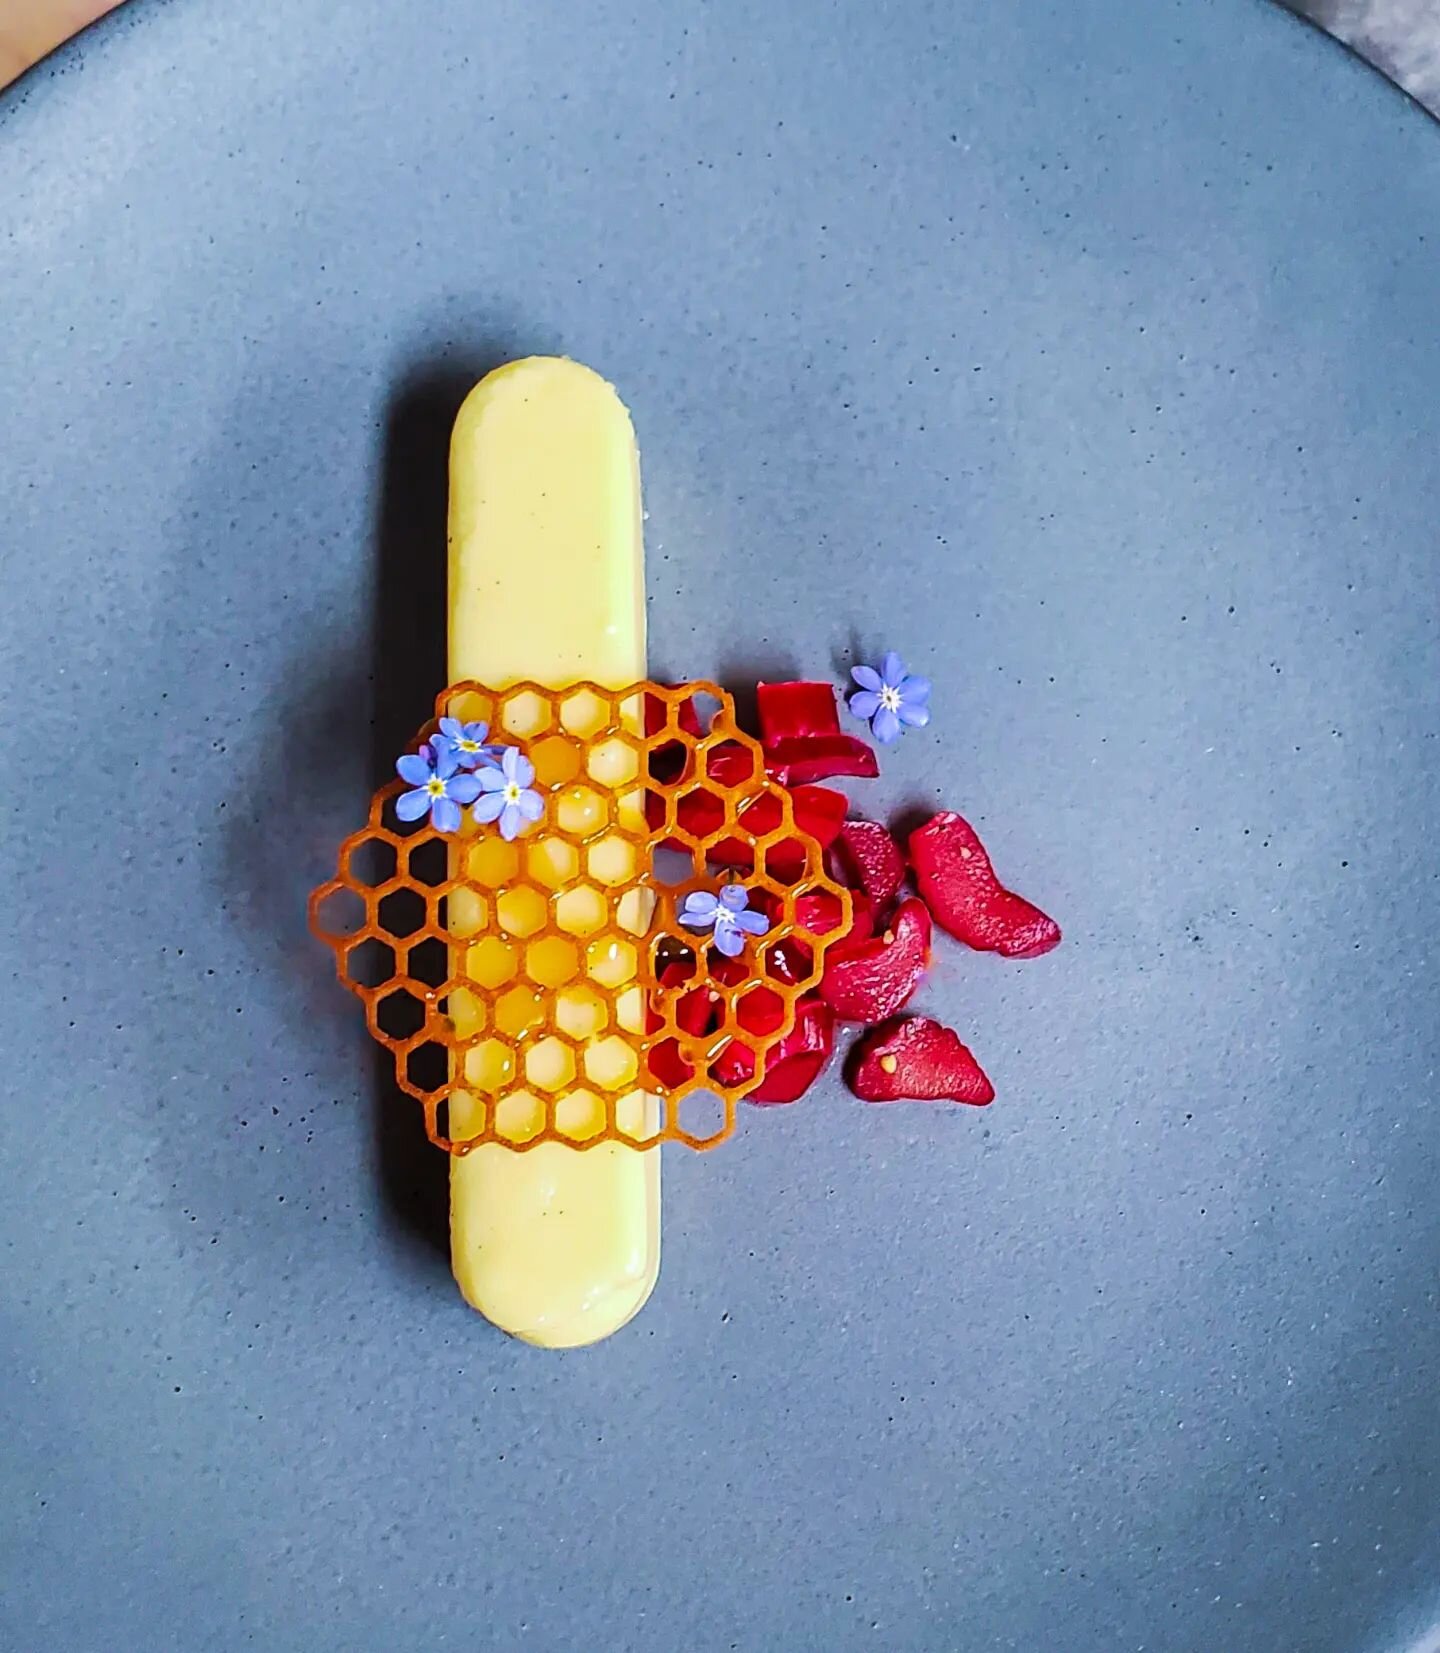 Yuzu white chocolate cremeux made using @valrhonausa inspiration Yuzu chocolate. 
Other components include;
Honey tuile, forget-me-nots and a black pepper compressed rhubarb.

The yuzu chocolate from @valrhonausa really captures the nuances of yuzu.
